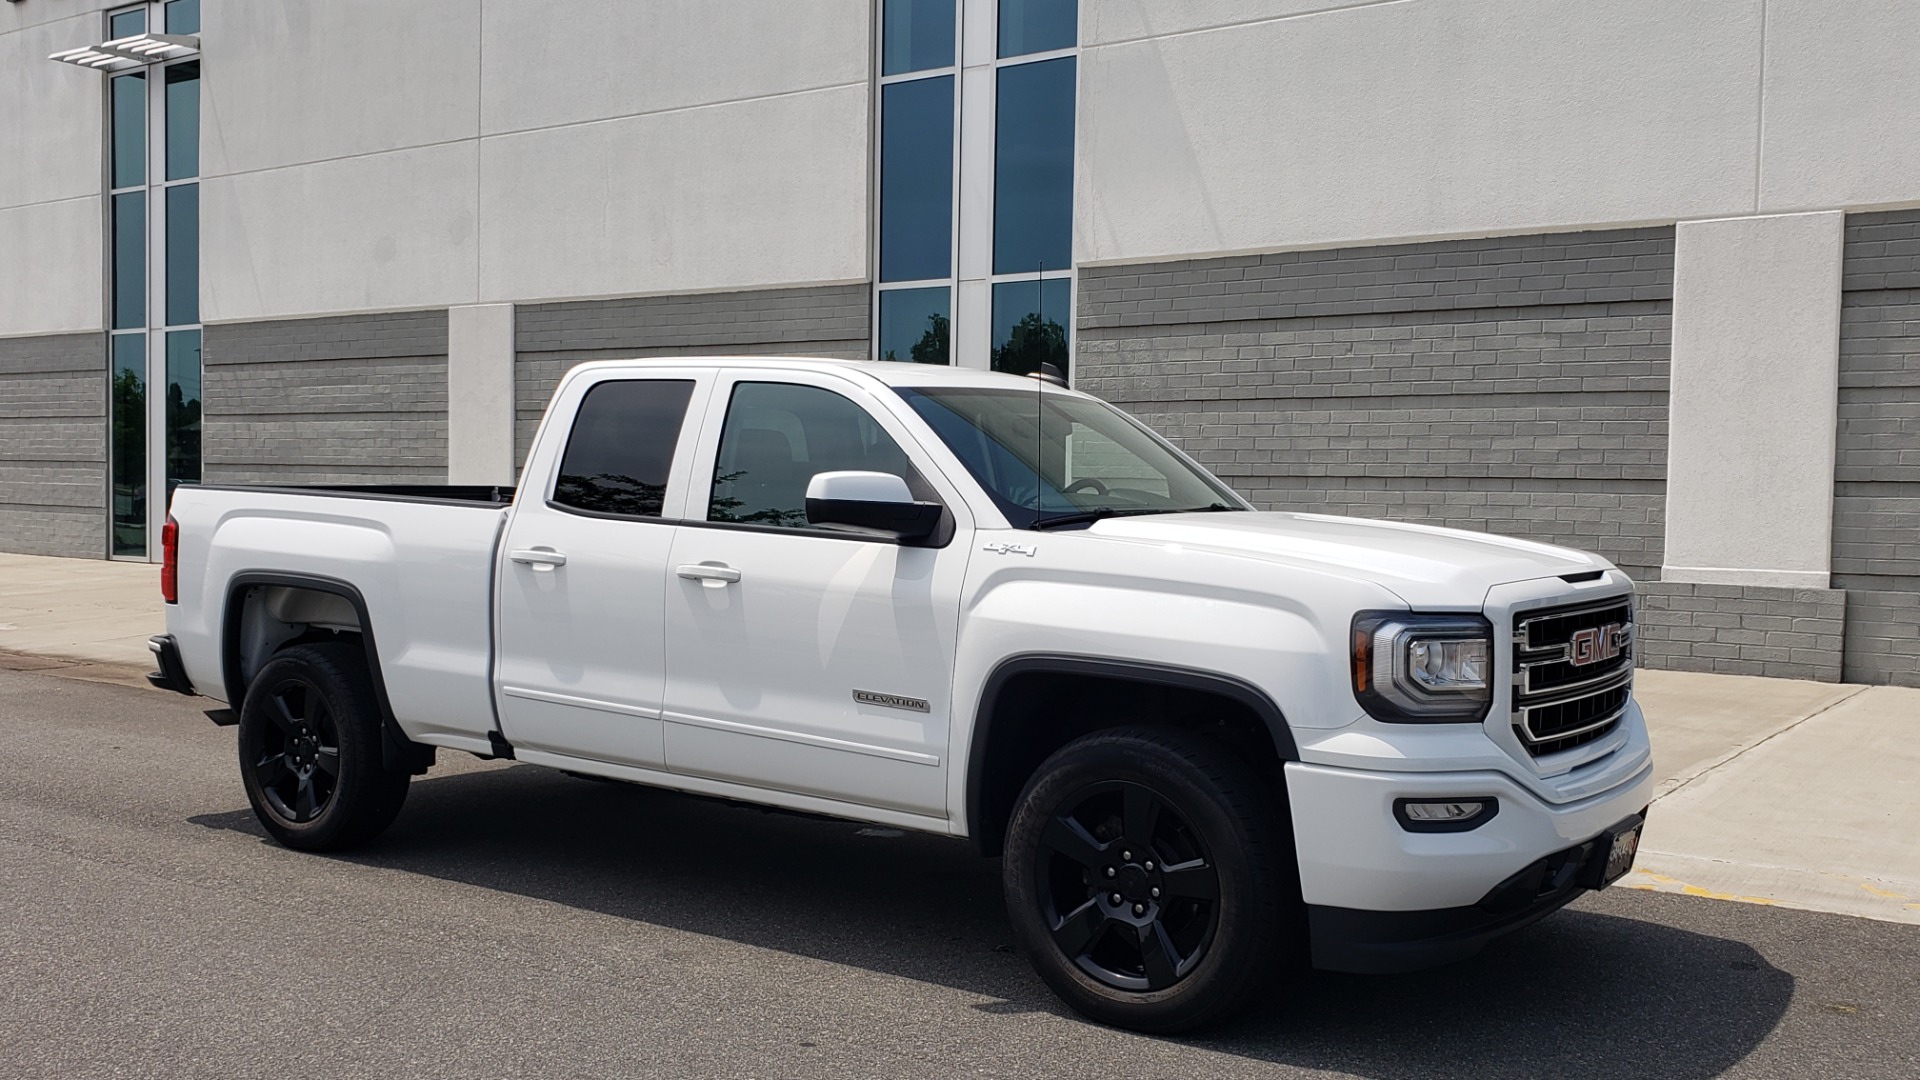 Used 2018 GMC SIERRA 1500 4WD DOUBLECAB / 143.5IN / 5.3L V8 / 6-SPD AUTO / REARVIEW for sale Sold at Formula Imports in Charlotte NC 28227 8